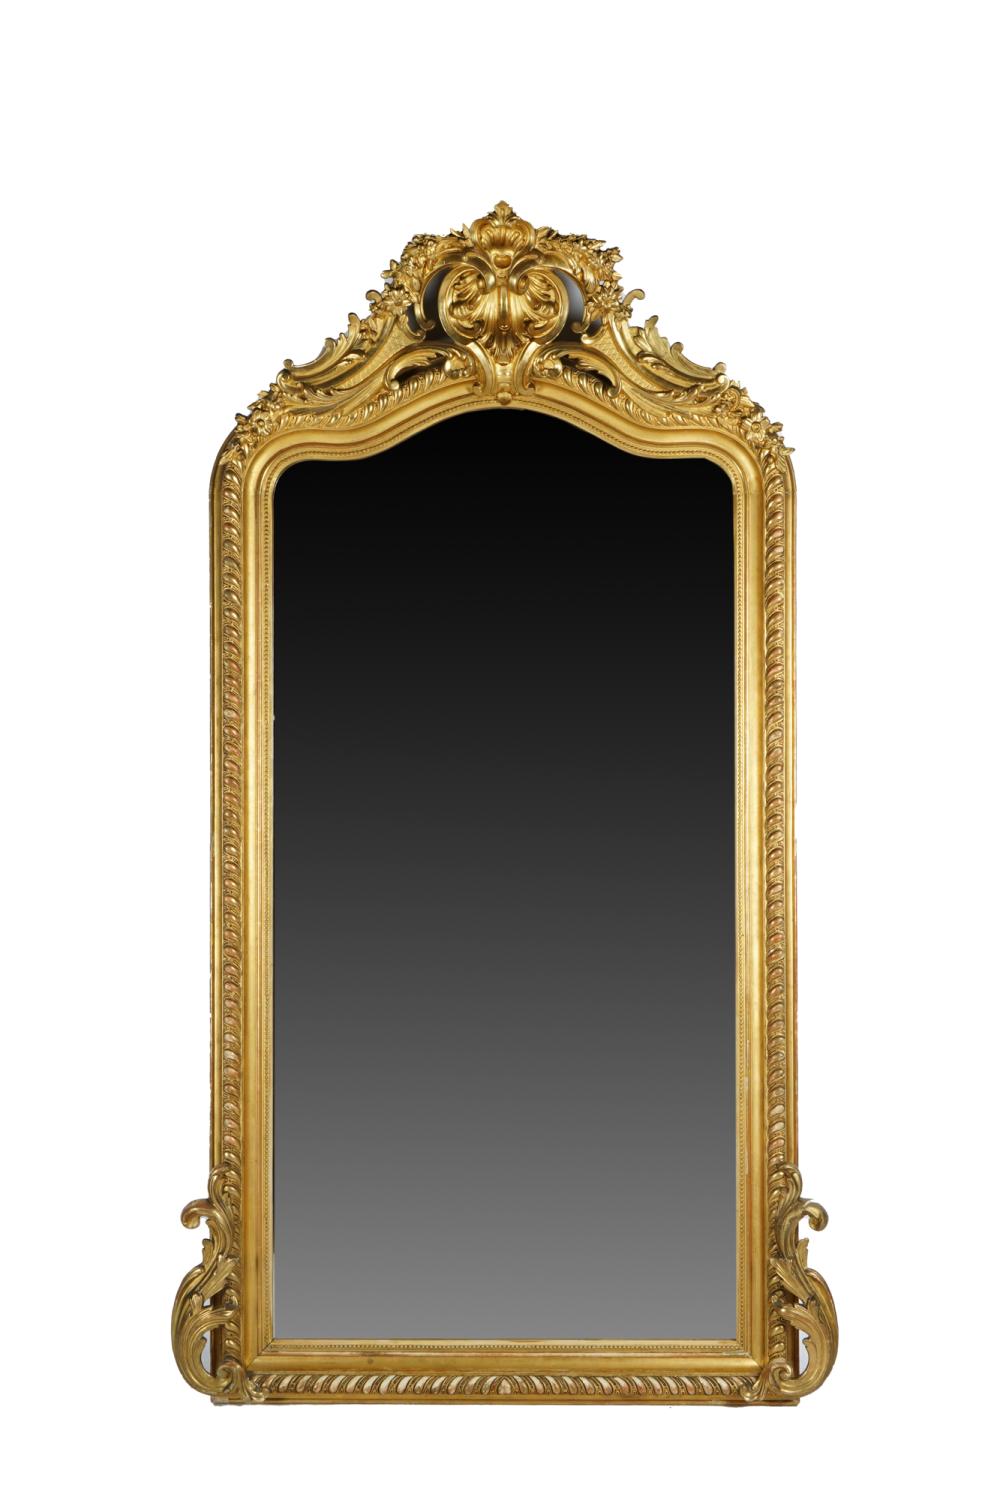 FRENCH GILTWOOD PIER MIRRORCondition: